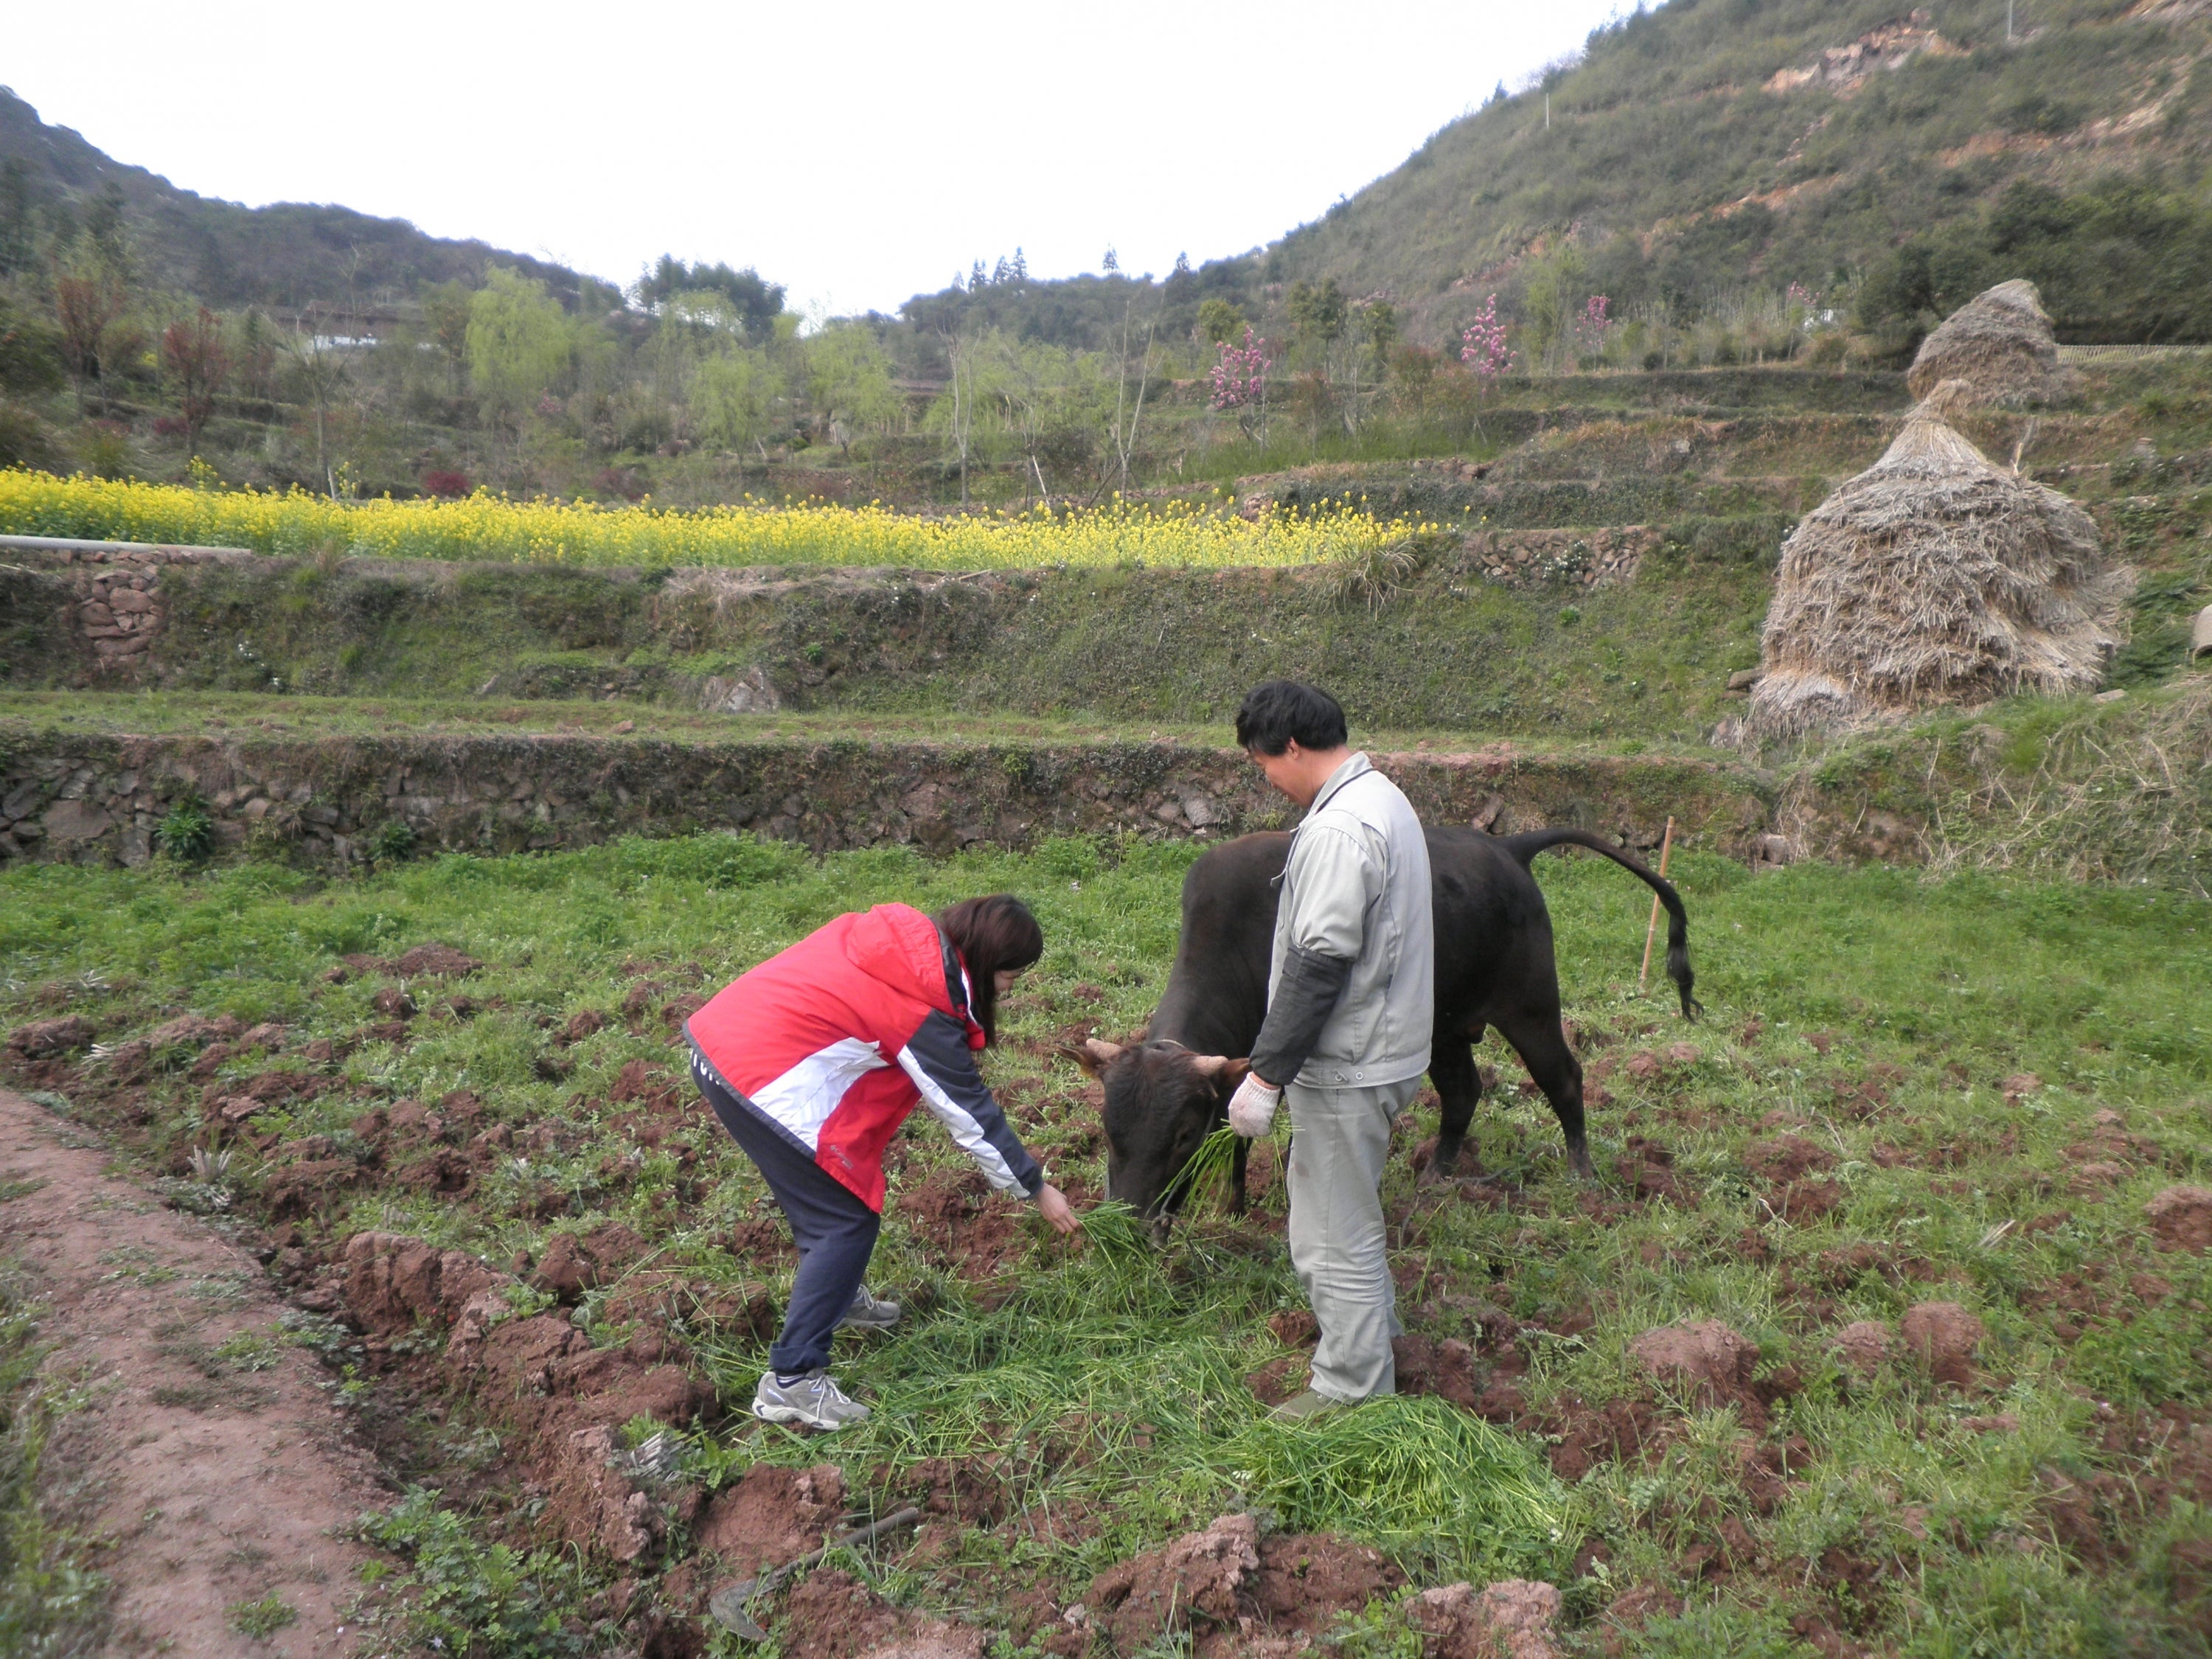 2 people standing in a field feeding a small bull